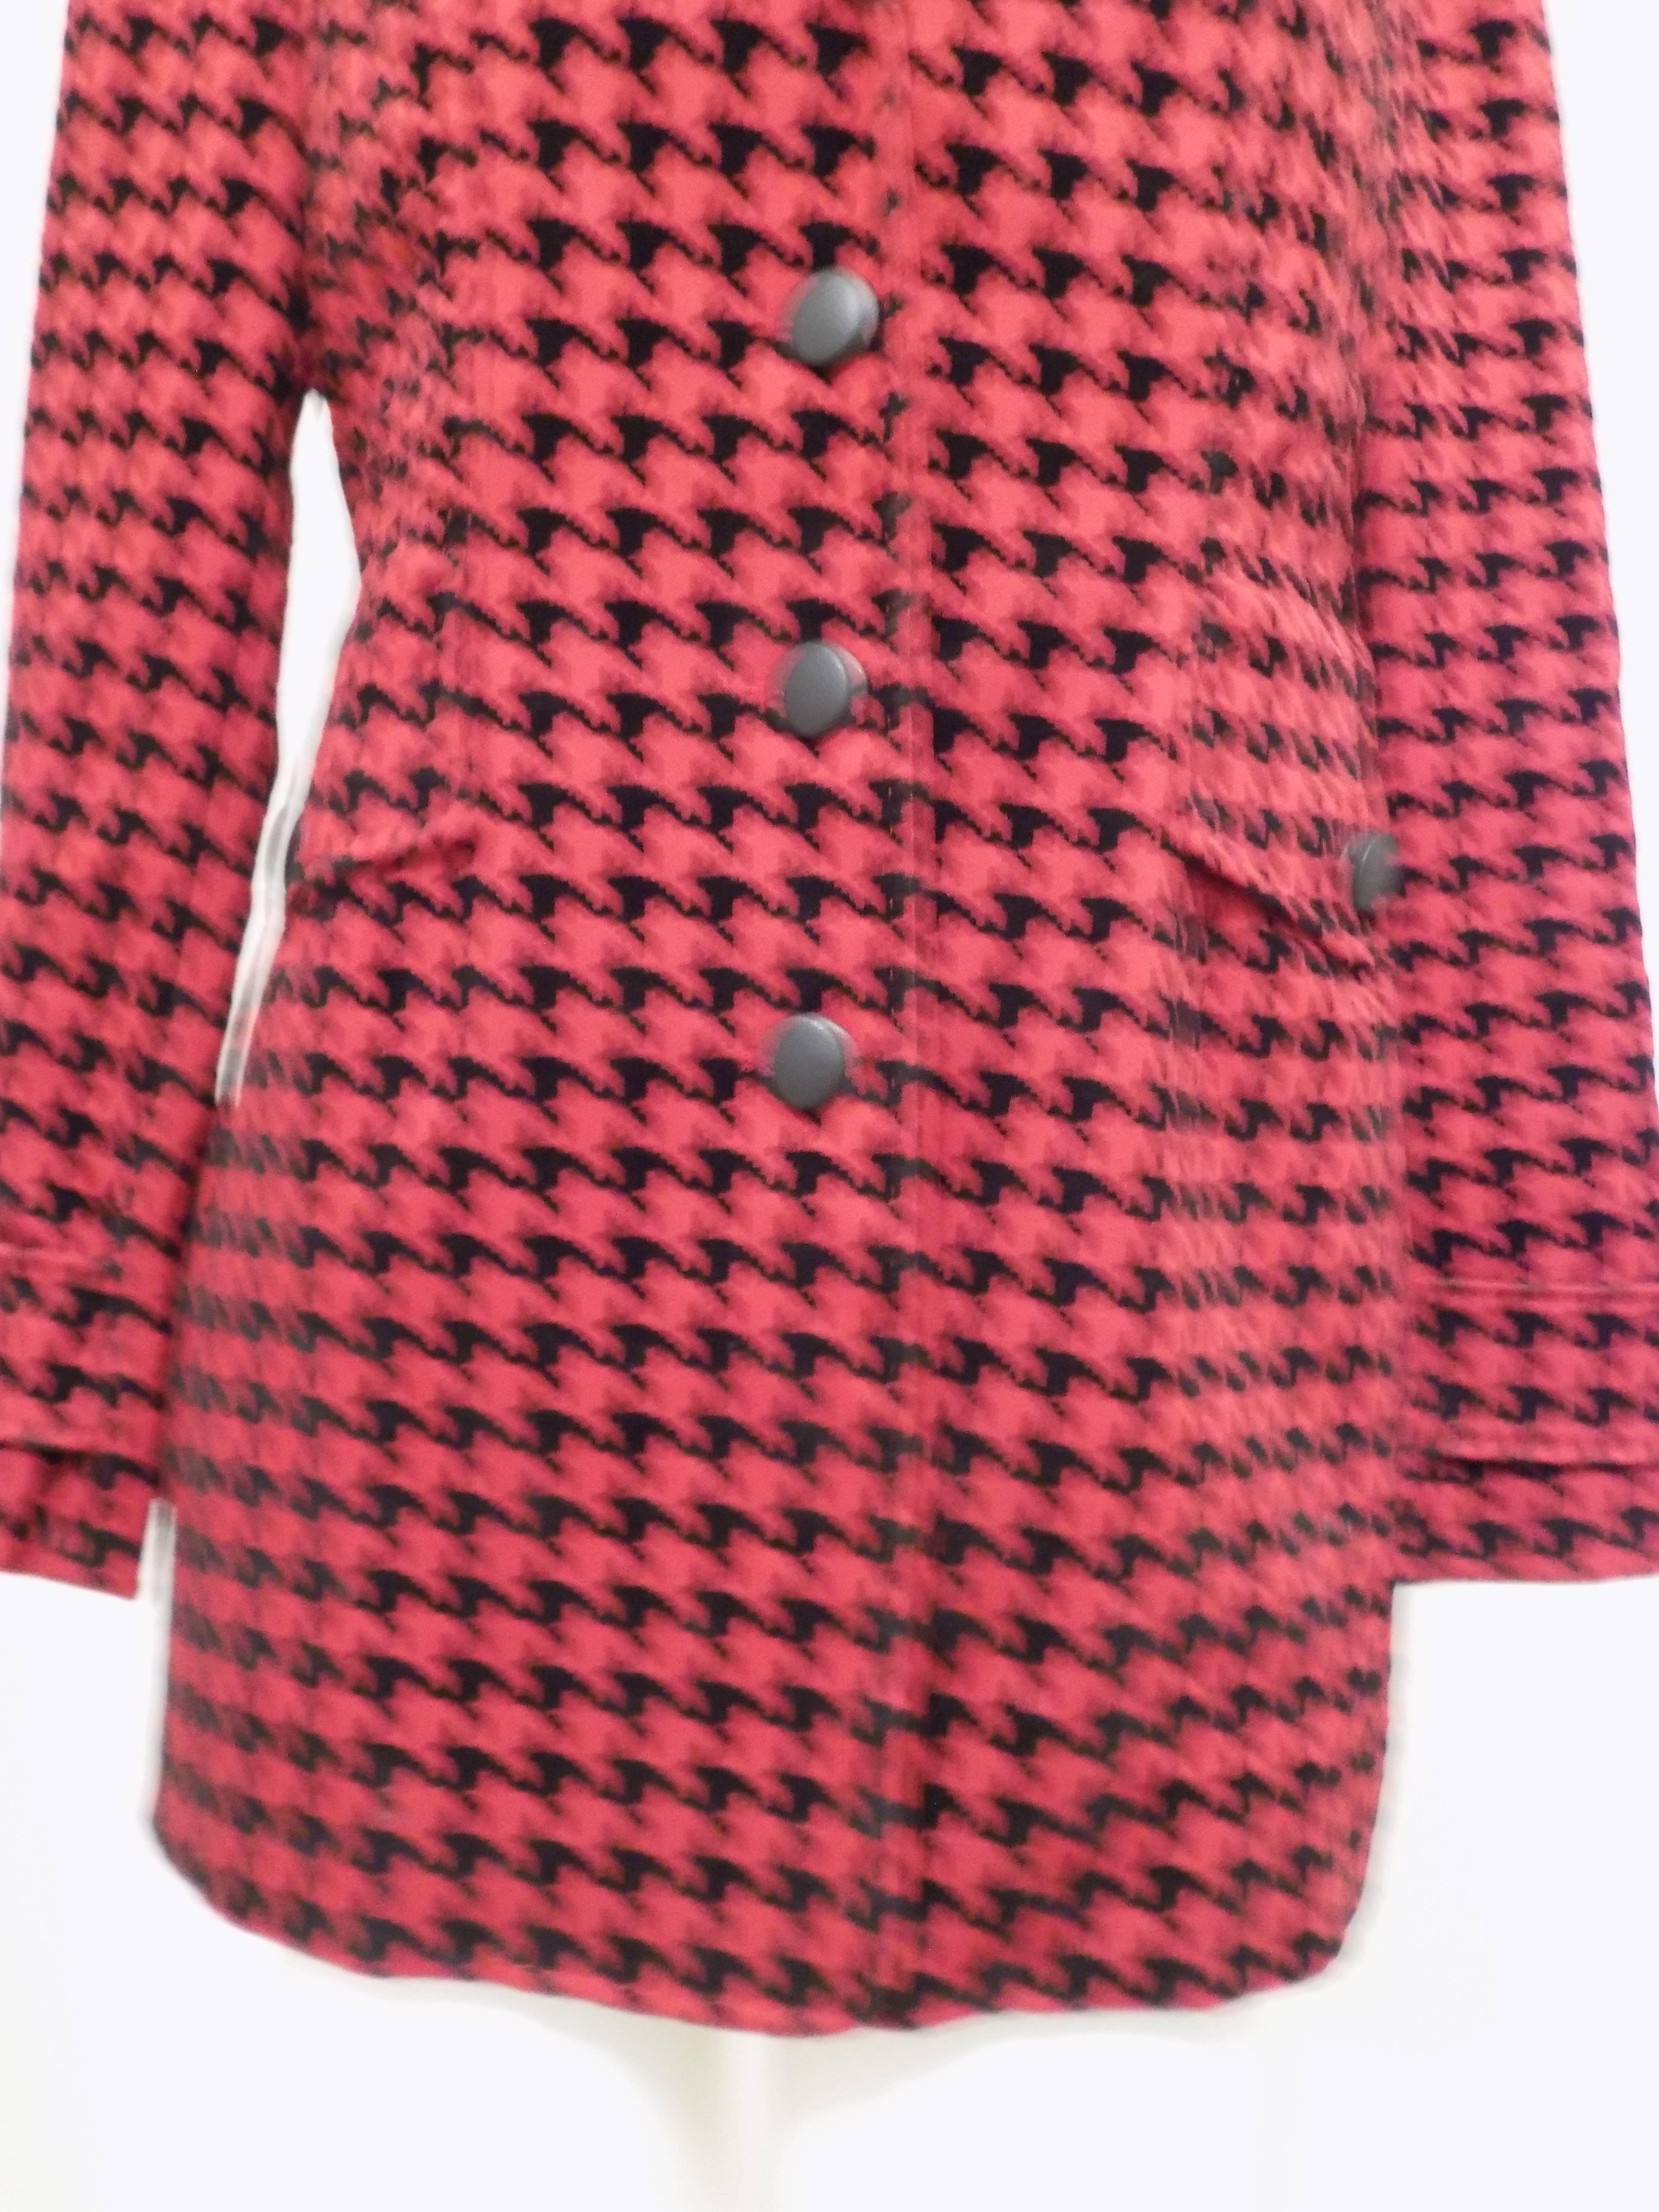 Moschino Couture Pied de poule Jacket
Totally made in italy in italian size range 42
Composition Wool
On both shoulders 100% leather 